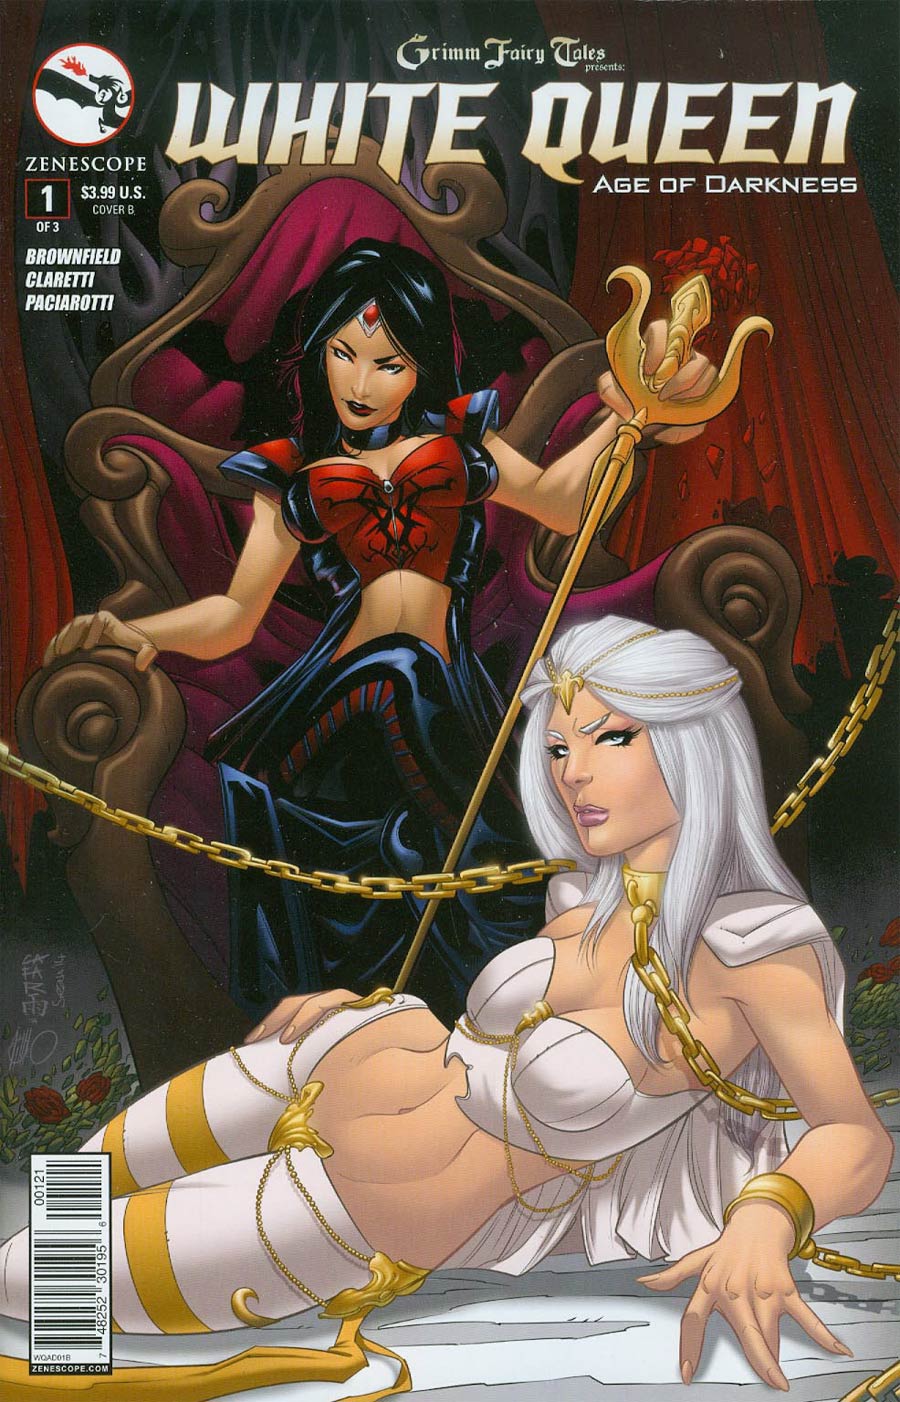 Grimm Fairy Tales Presents White Queen #1 Cover B Giuseppe Cafaro (Age Of Darkness Tie-In)